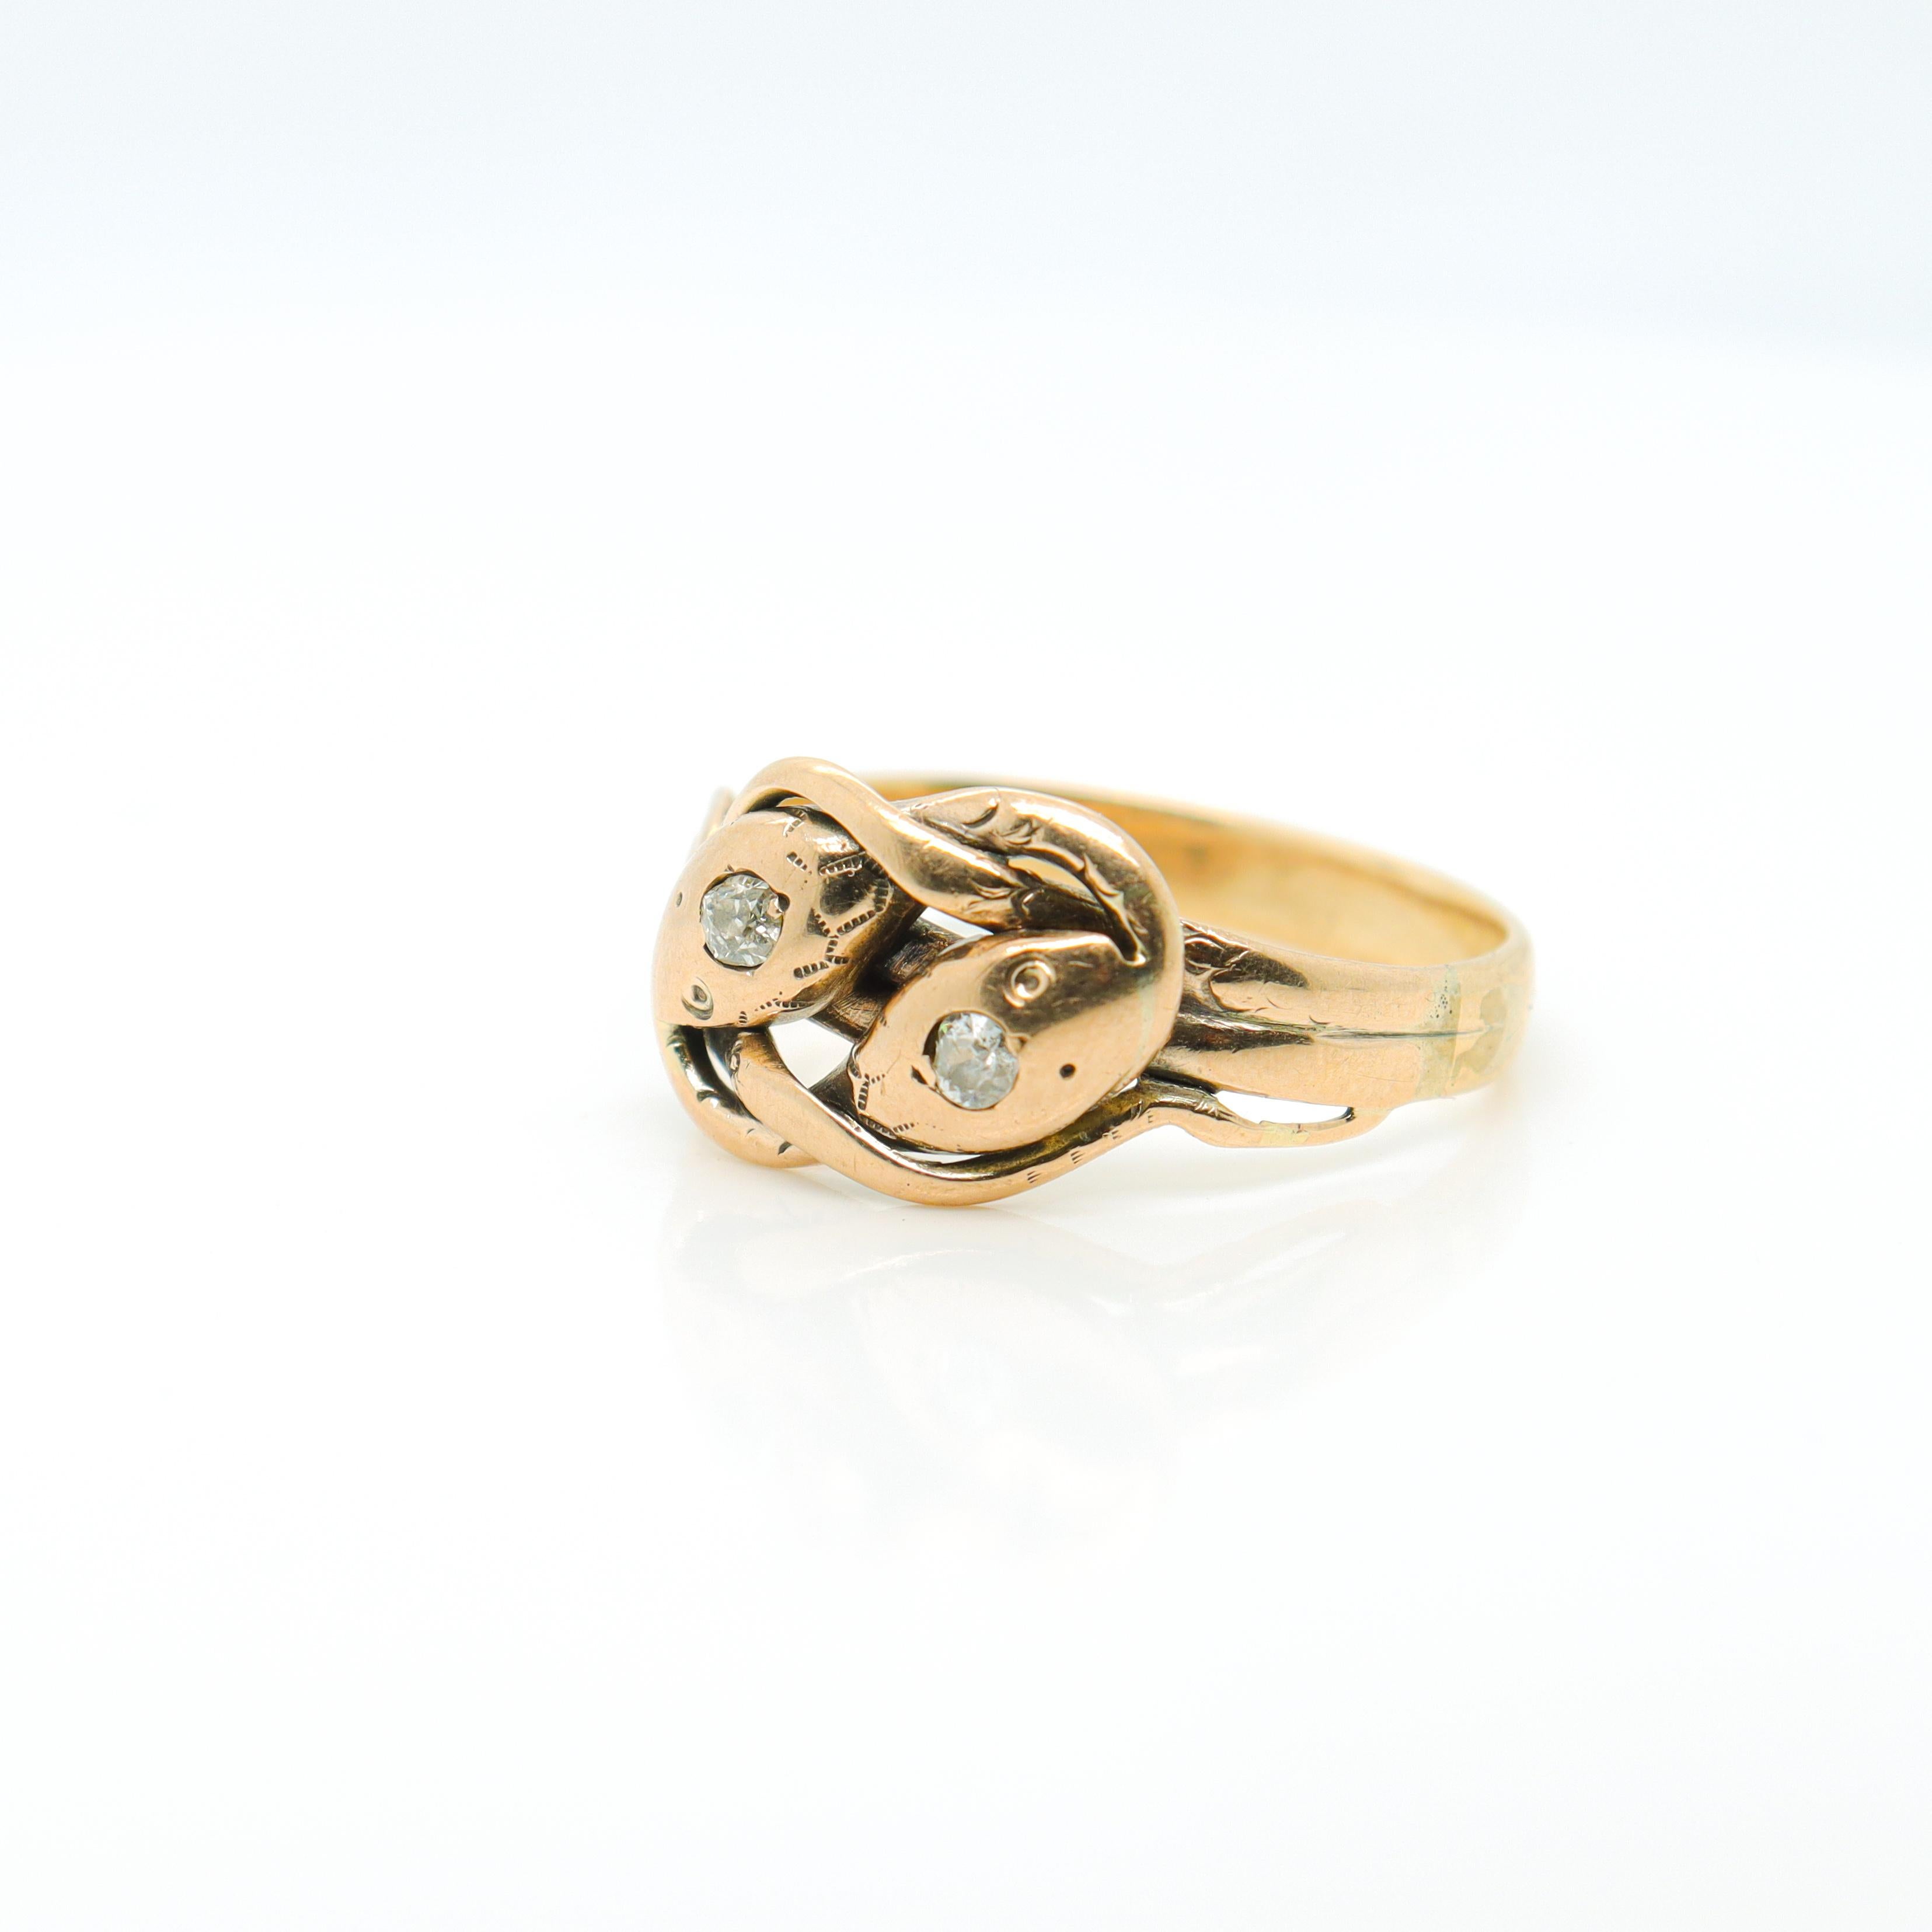 A fine antique gold & diamond figural snake ring.

In 14K gold.

In the shape of 2 intertwined snakes. 

Each pave set with a round single cut diamond to their heads and traces of an etched design.

Simply a wonderful late Victorian